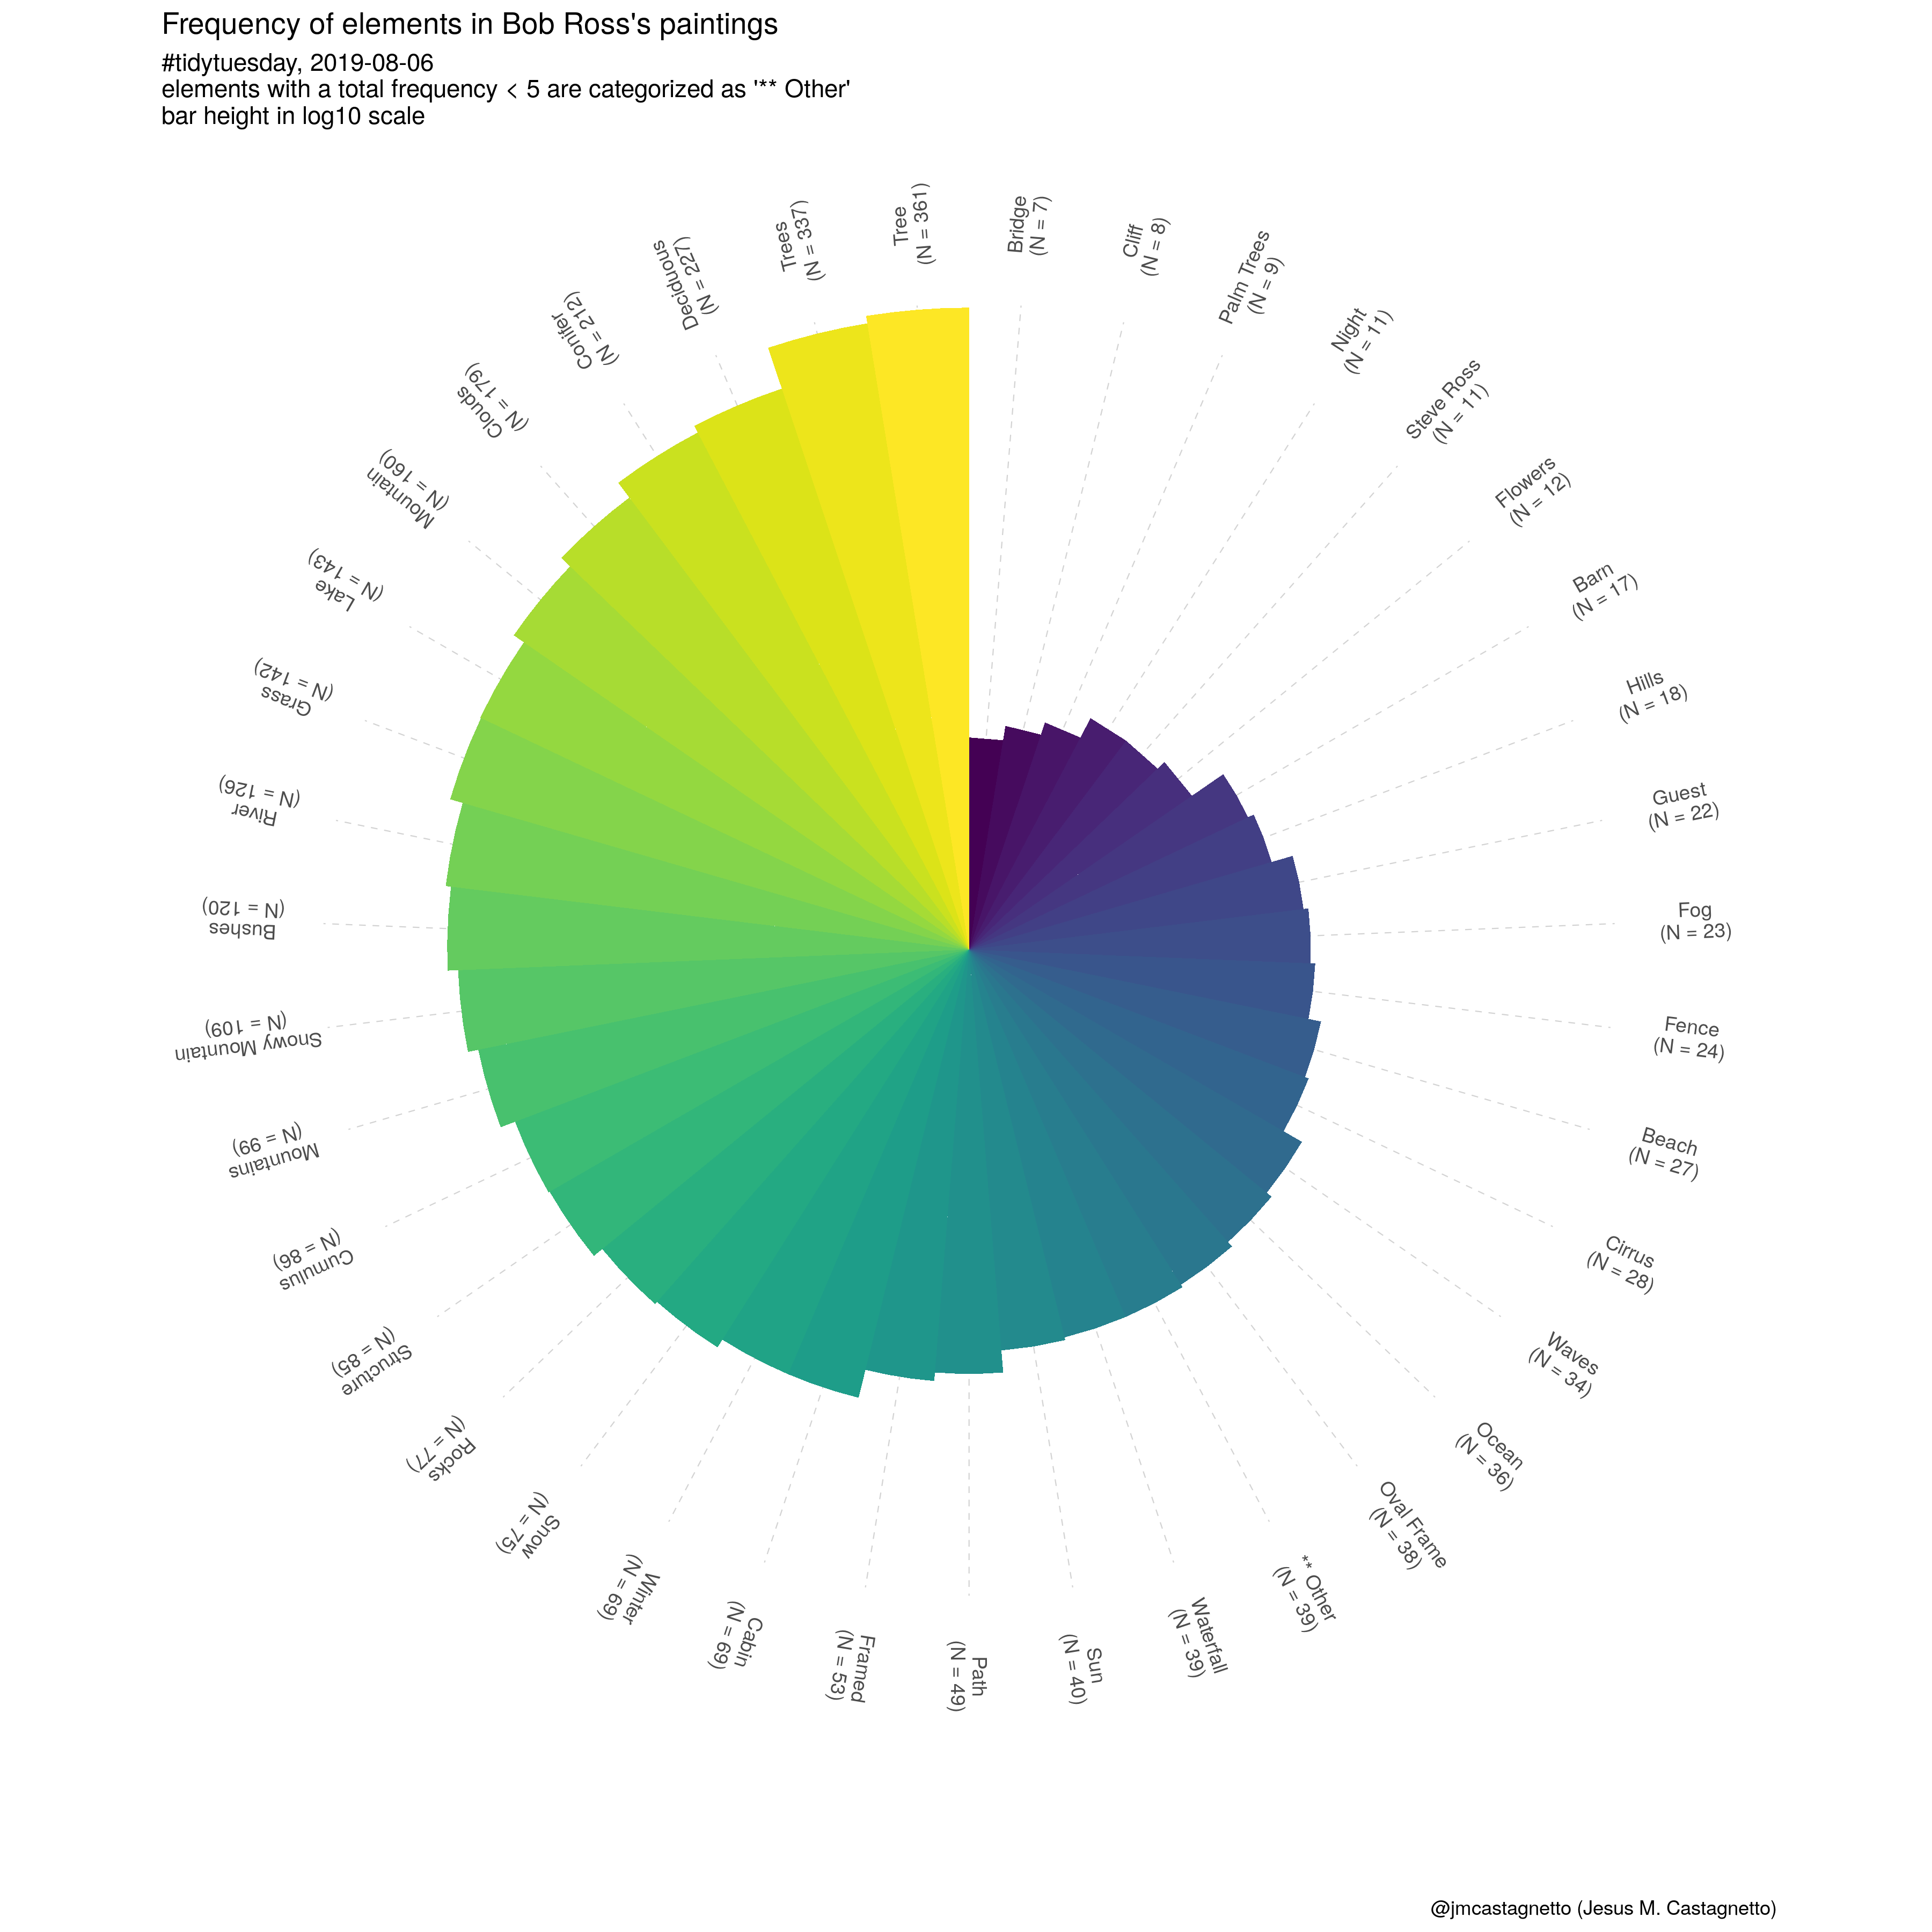 Is it a palette? or is it a circular barchart?